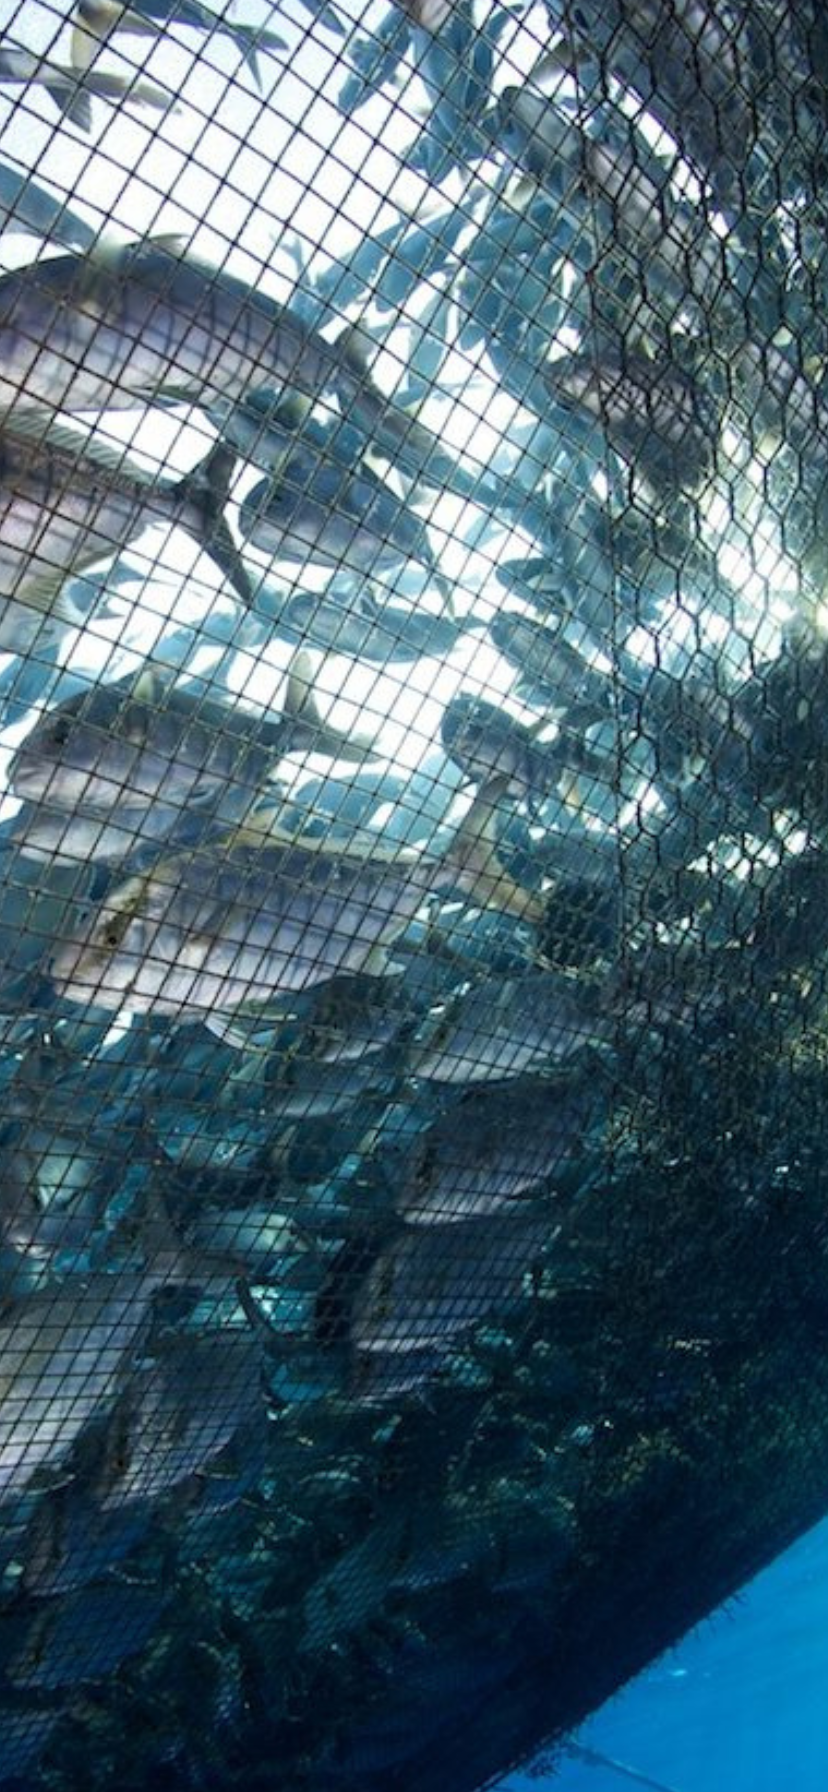 Durable Aquaculture Nets for Fish Farms & Commercial Fisheries